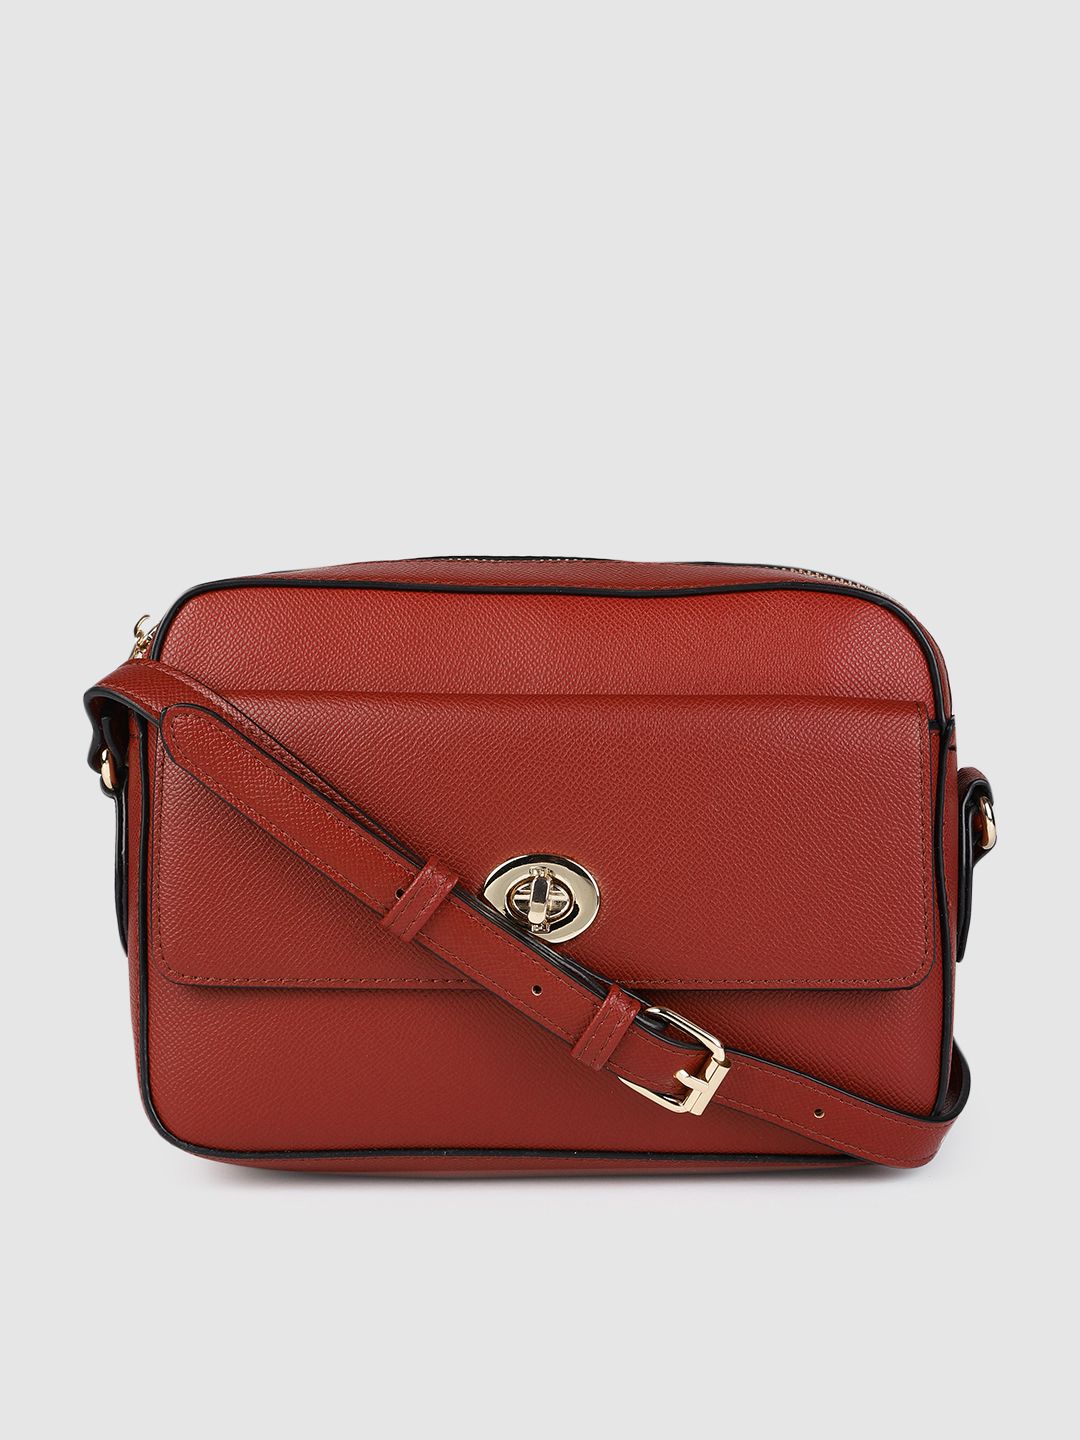 Accessorize Maroon Structured Sling Bag Price in India